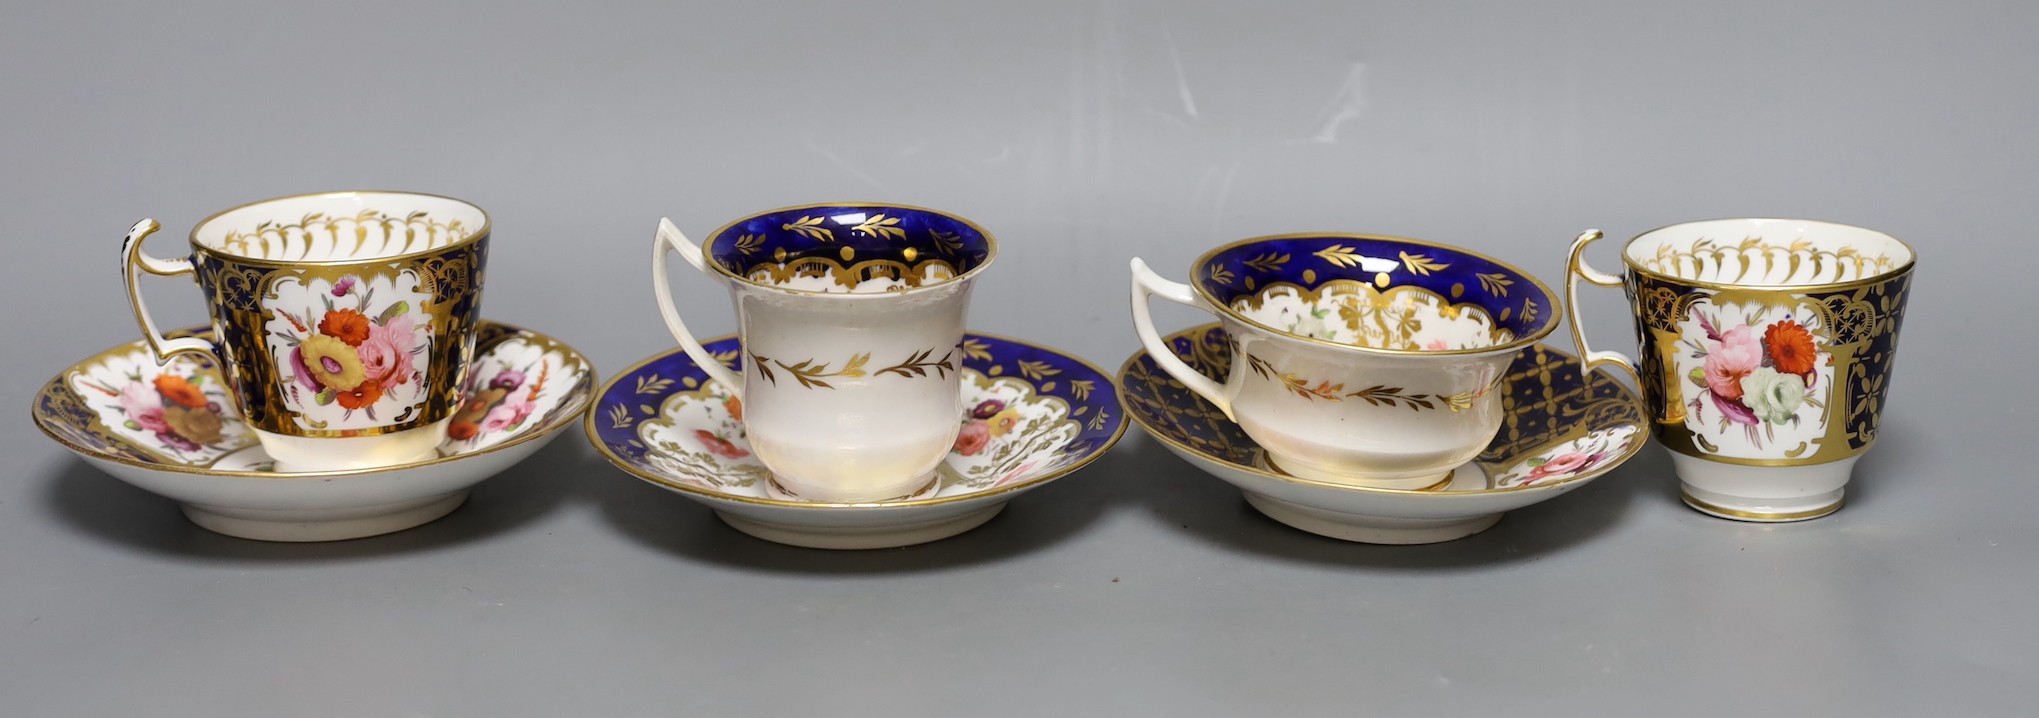 An early 19th century pair of Coalport coffee cups and saucer painted with pattern 793 and a New - Image 2 of 6